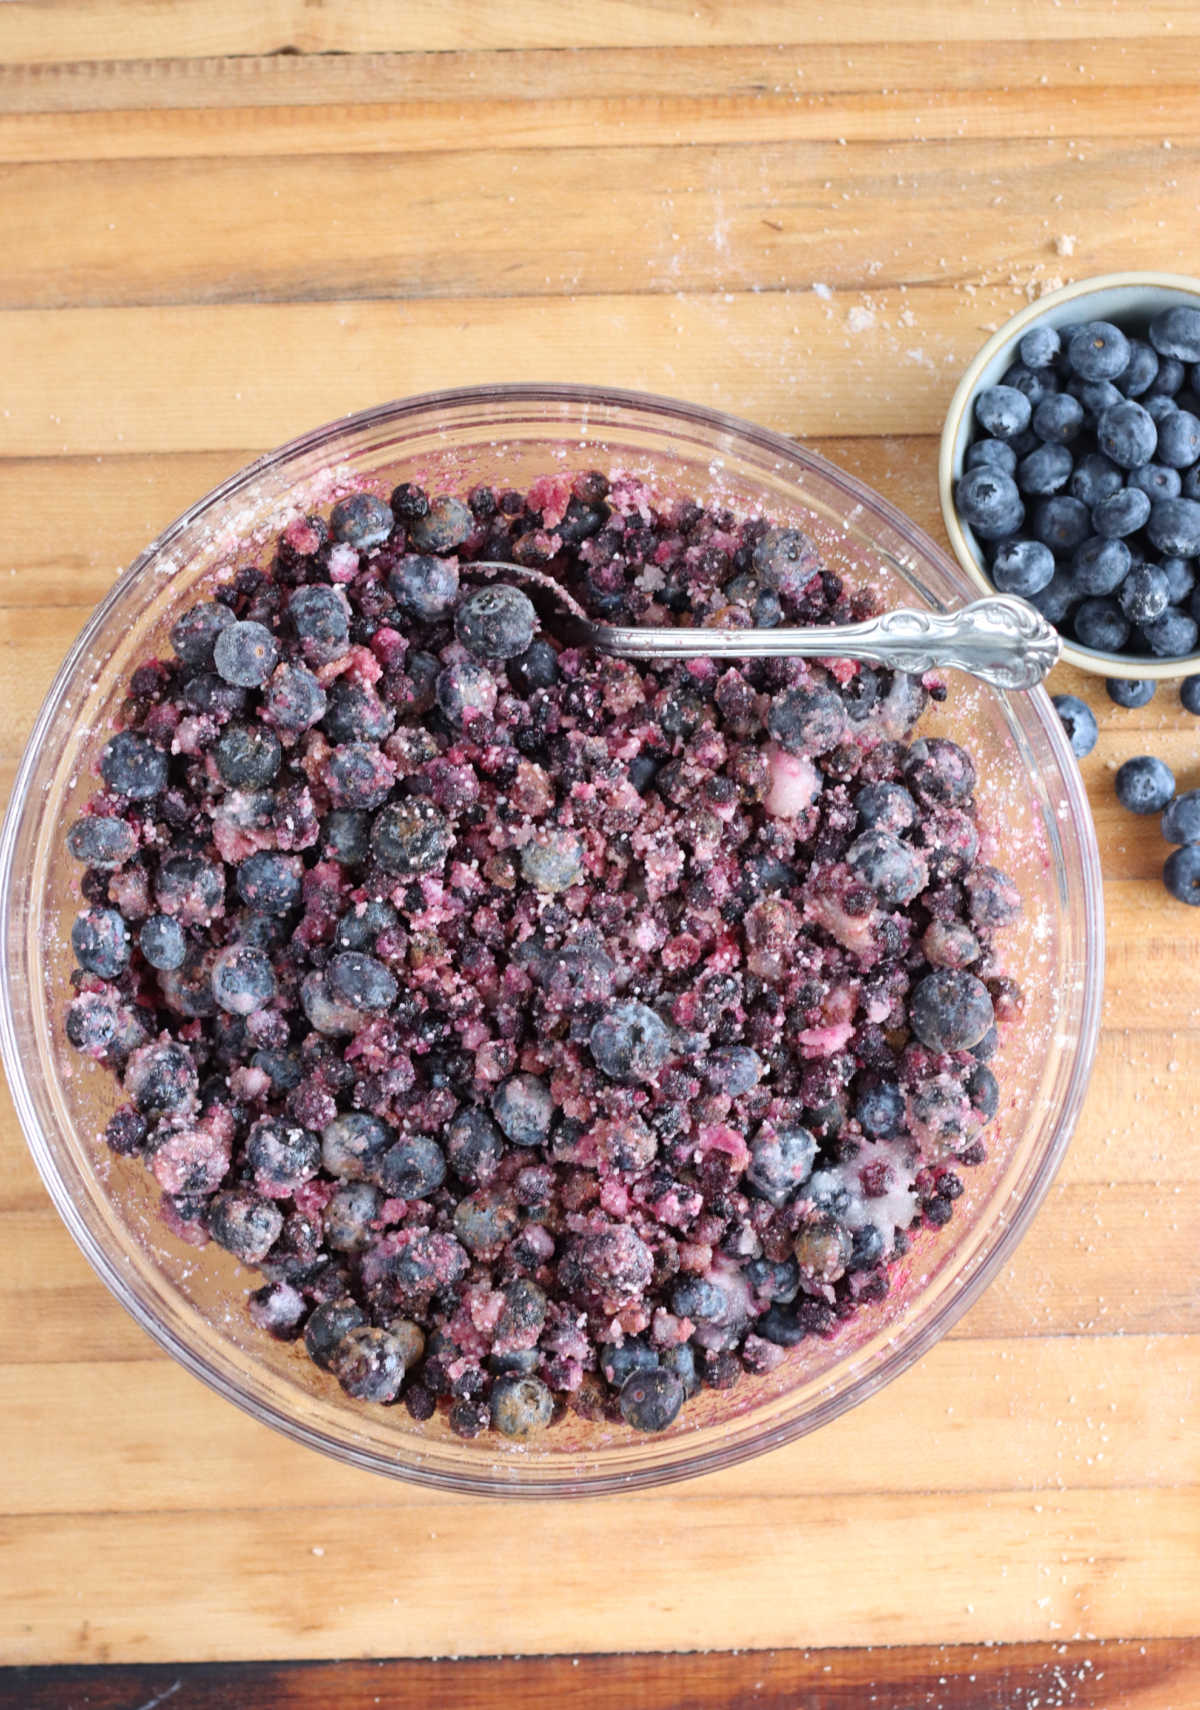 Frozen blueberries with sugar, tapioca in clear glass bowl on butcher block.